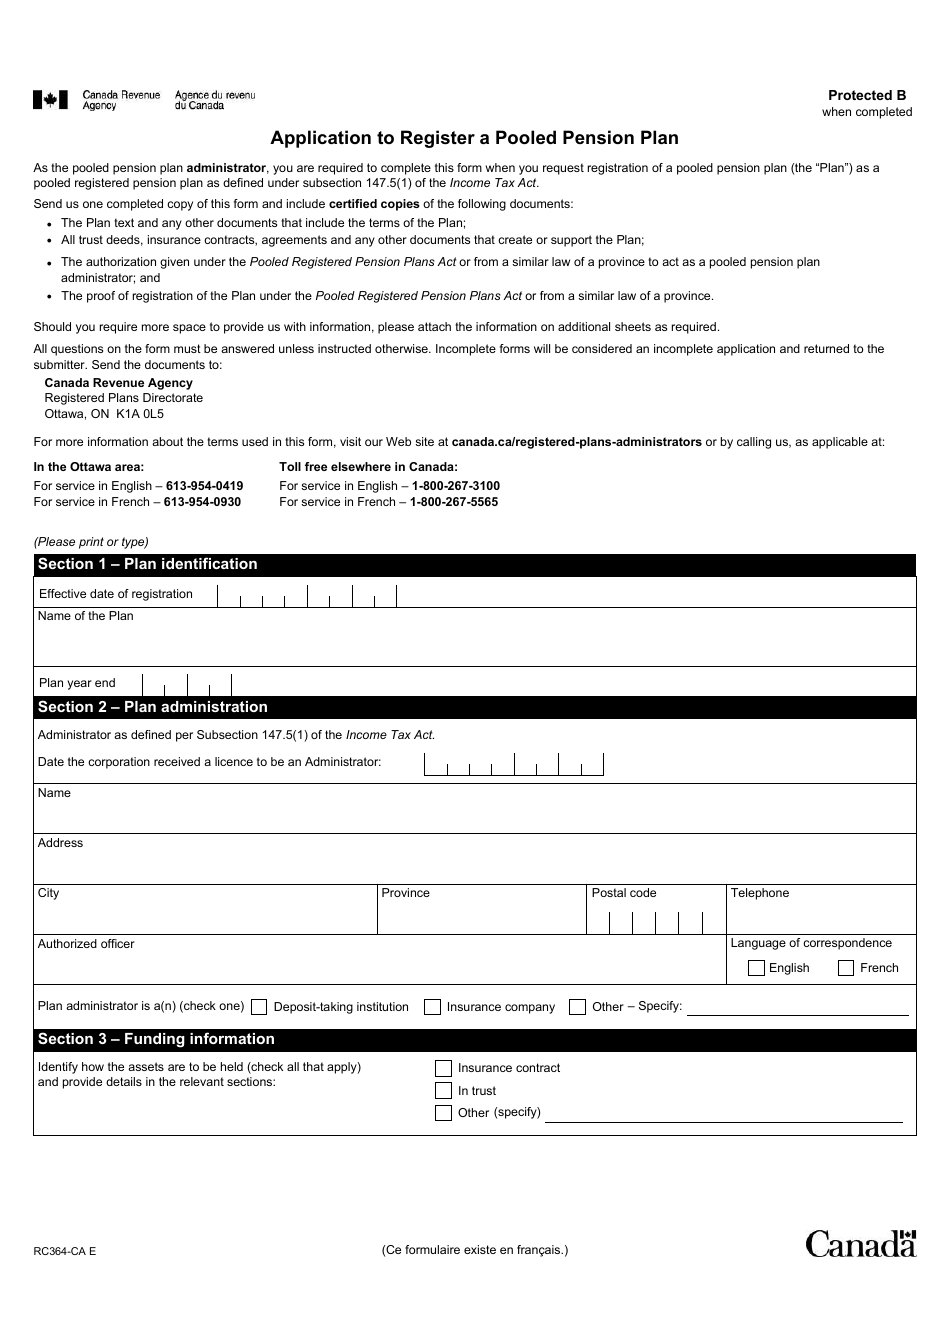 Form RC364-CA Application to Register a Pooled Pension Plan - Canada, Page 1